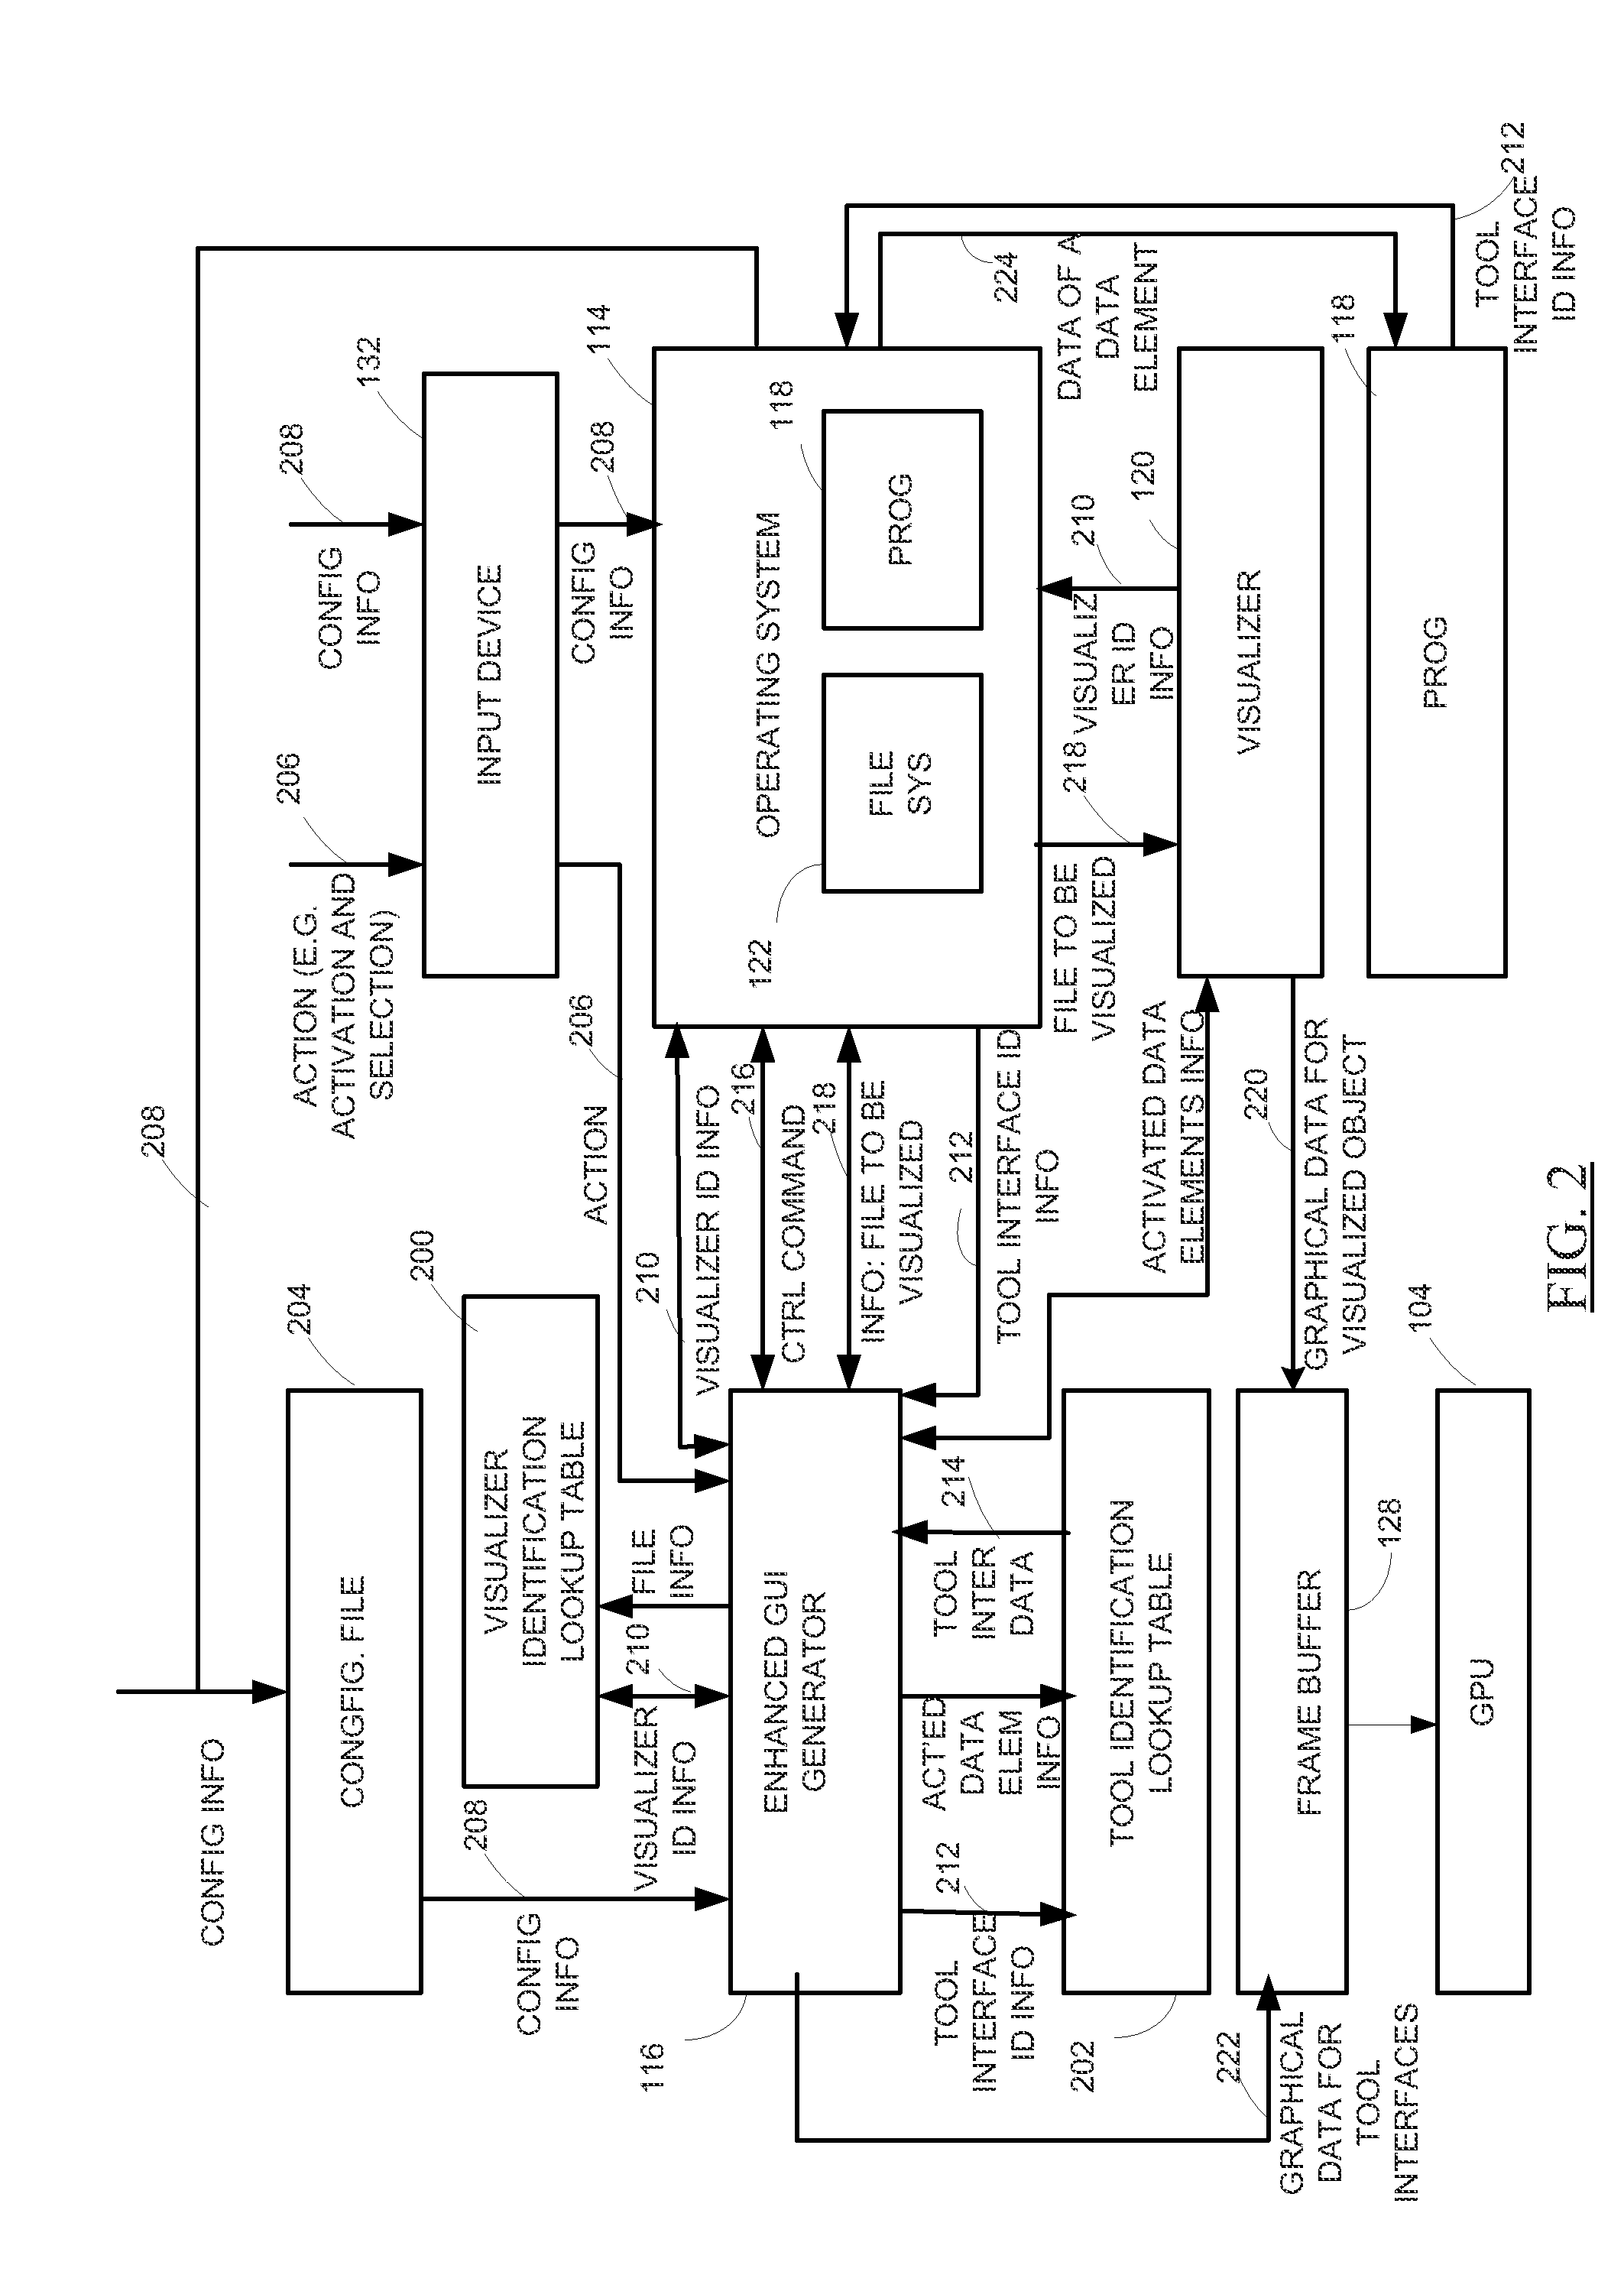 Method and Apparatus For Providing a User Interface For a File System